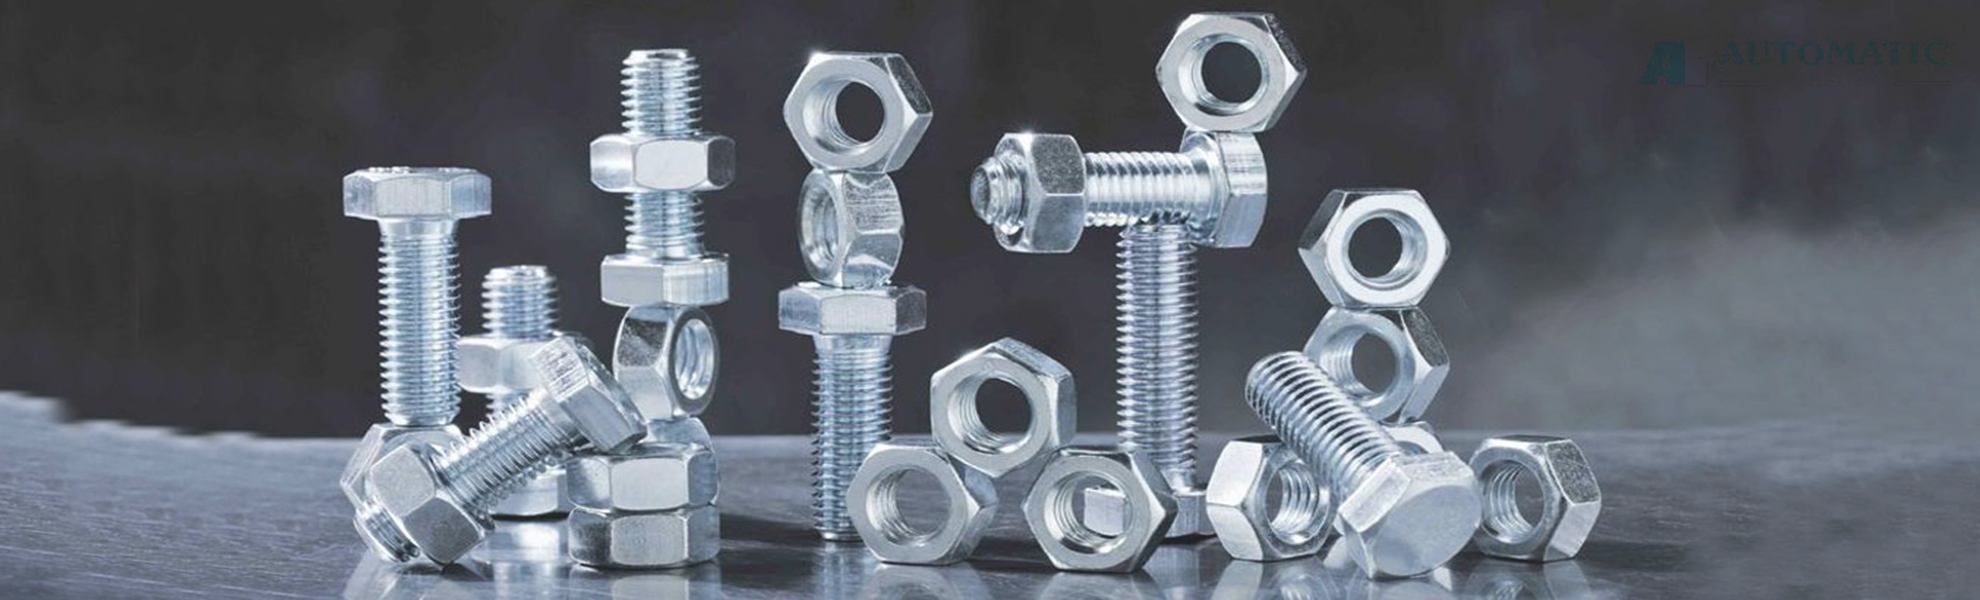 India's Leading Supplier of Stainless Steel Products